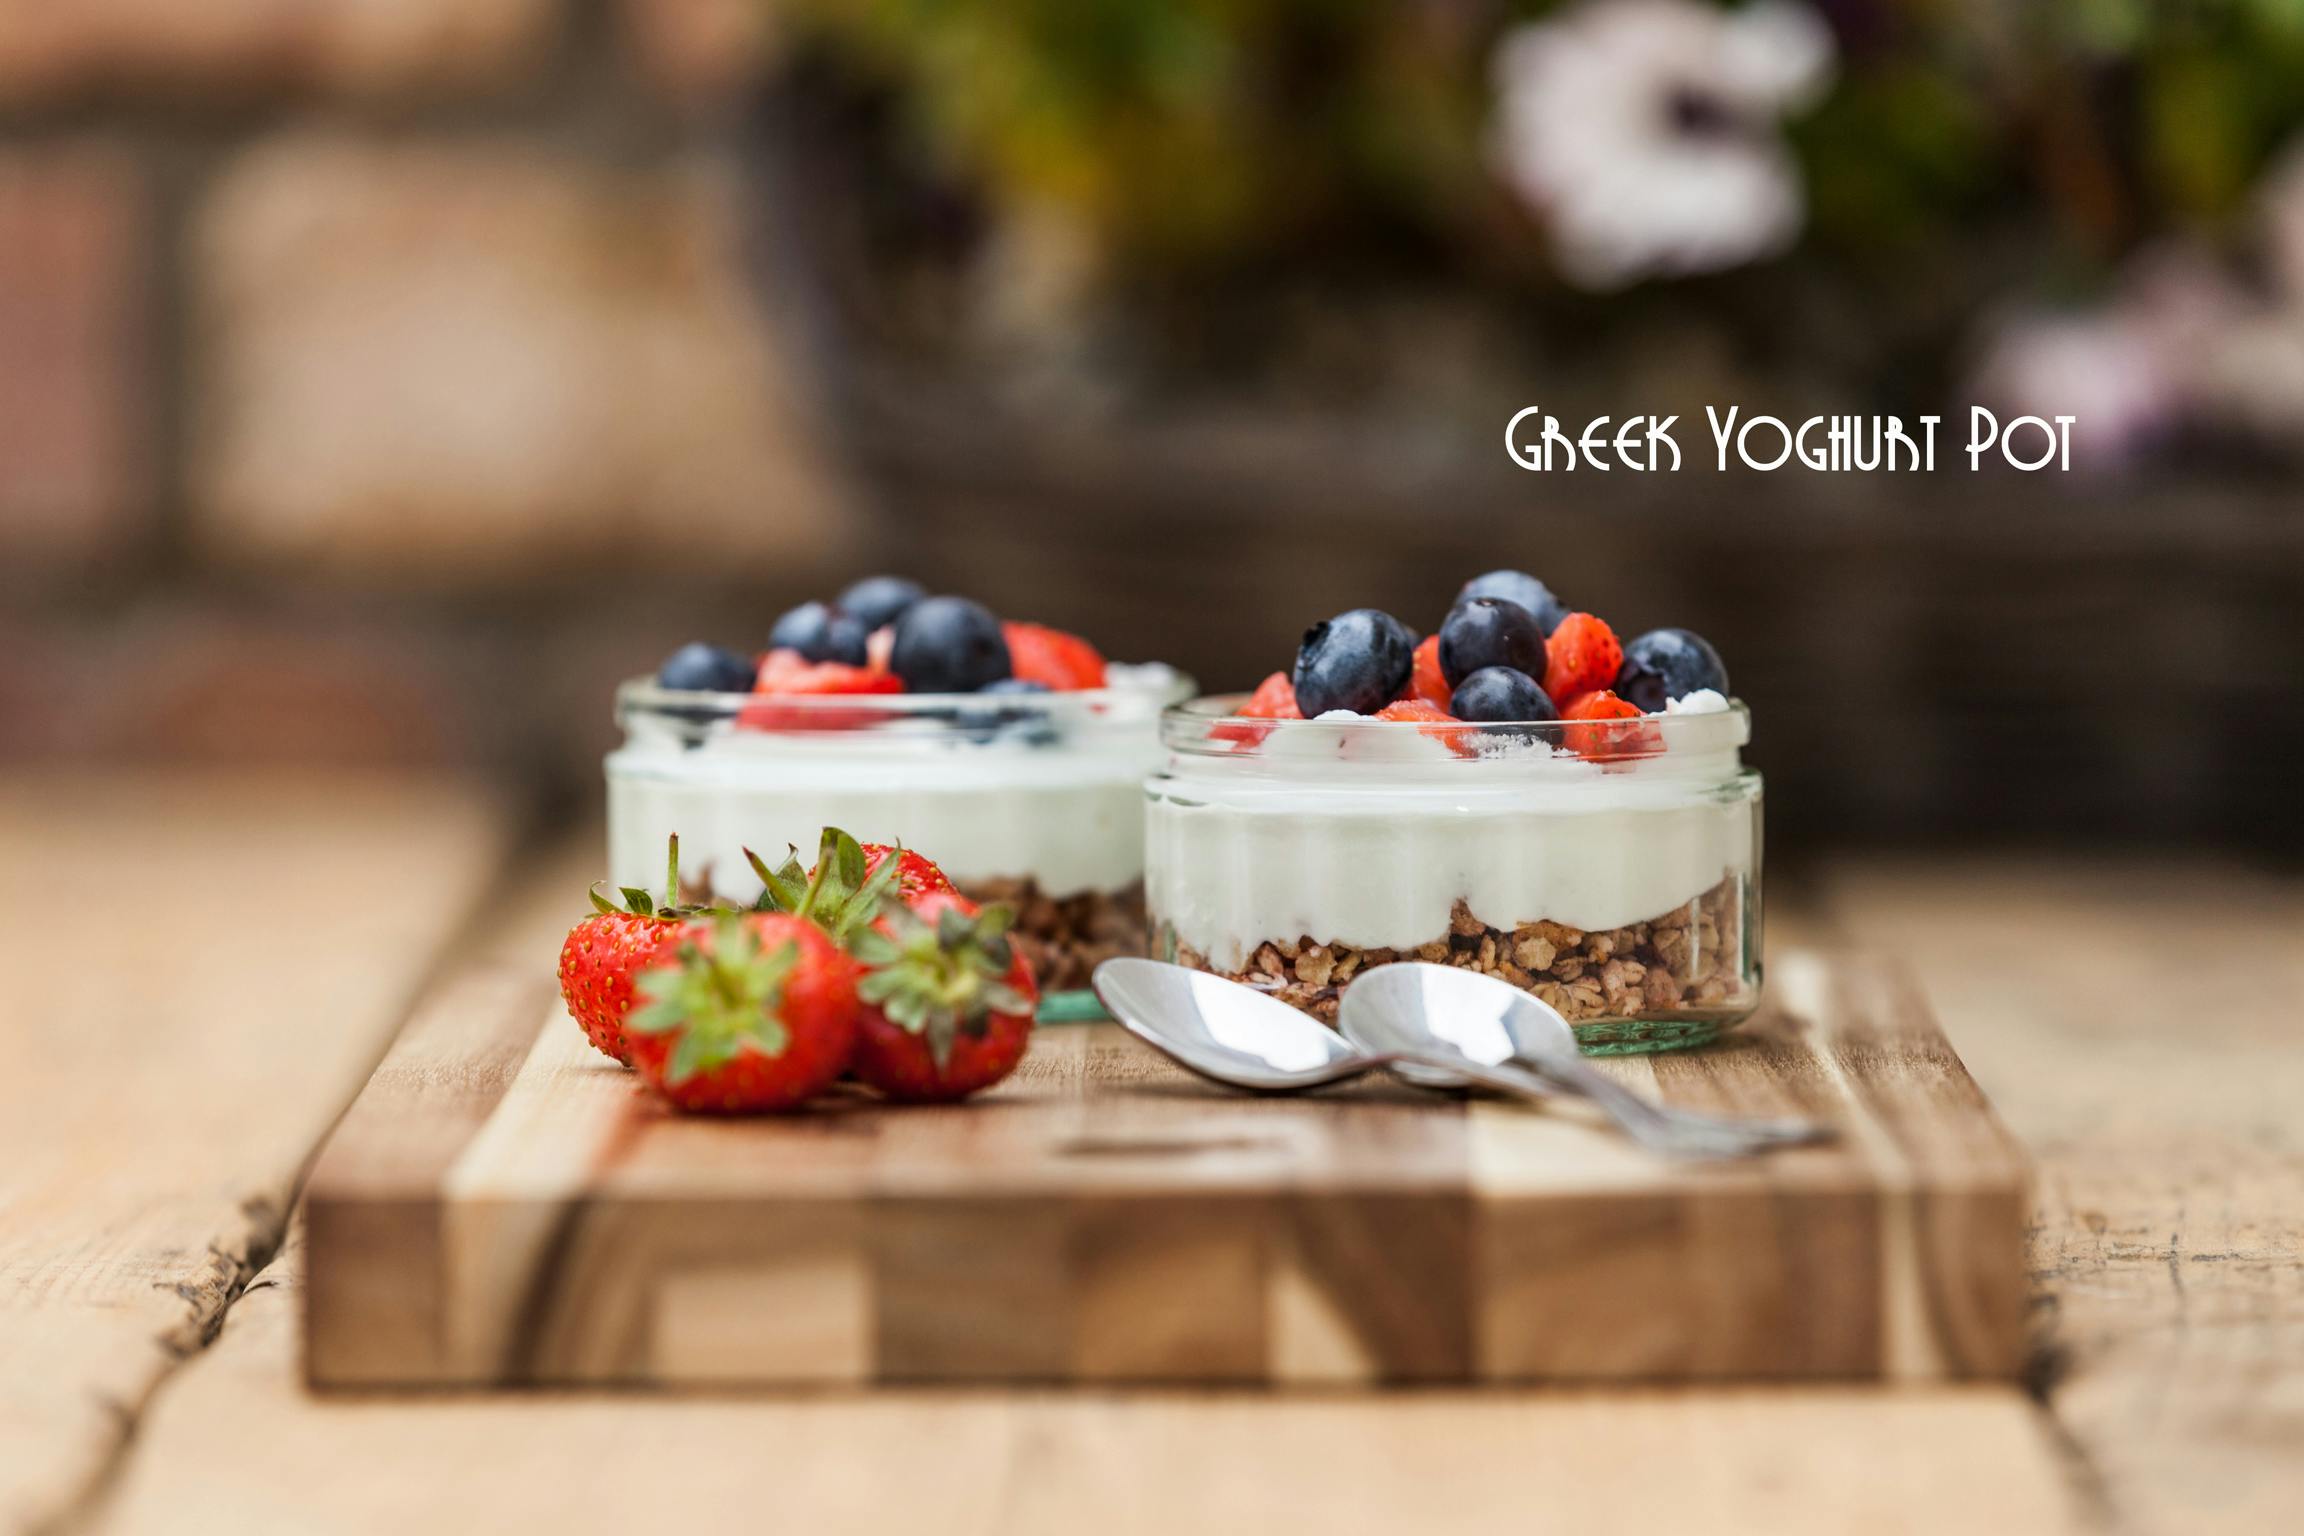 Two freshly prepared Greek yoghurt pots, with a mix of fresh fruits standing on a wooden board